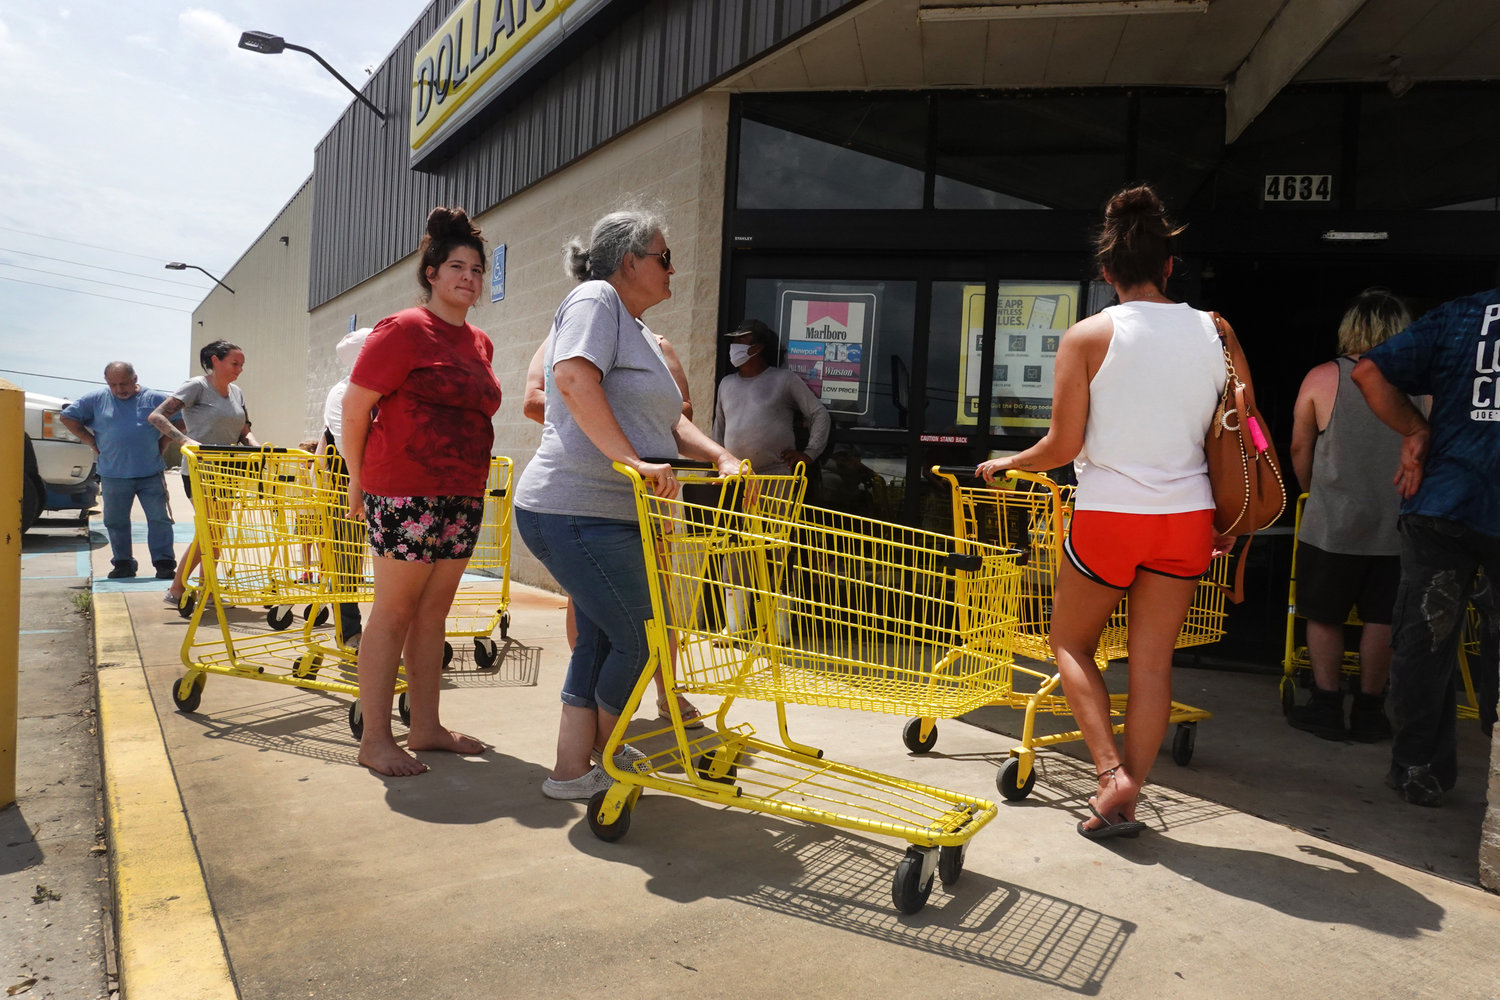 People wait in line to buy supplies at a Dollar Store that opened despite having no power following Hurricane Ida on Tuesday, August 31, 2021 in Houma, Louisiana.  Ida made landfall August 29, as a Category 4 storm southwest of New Orleans. (Scott Olson/Getty Images/TNS)